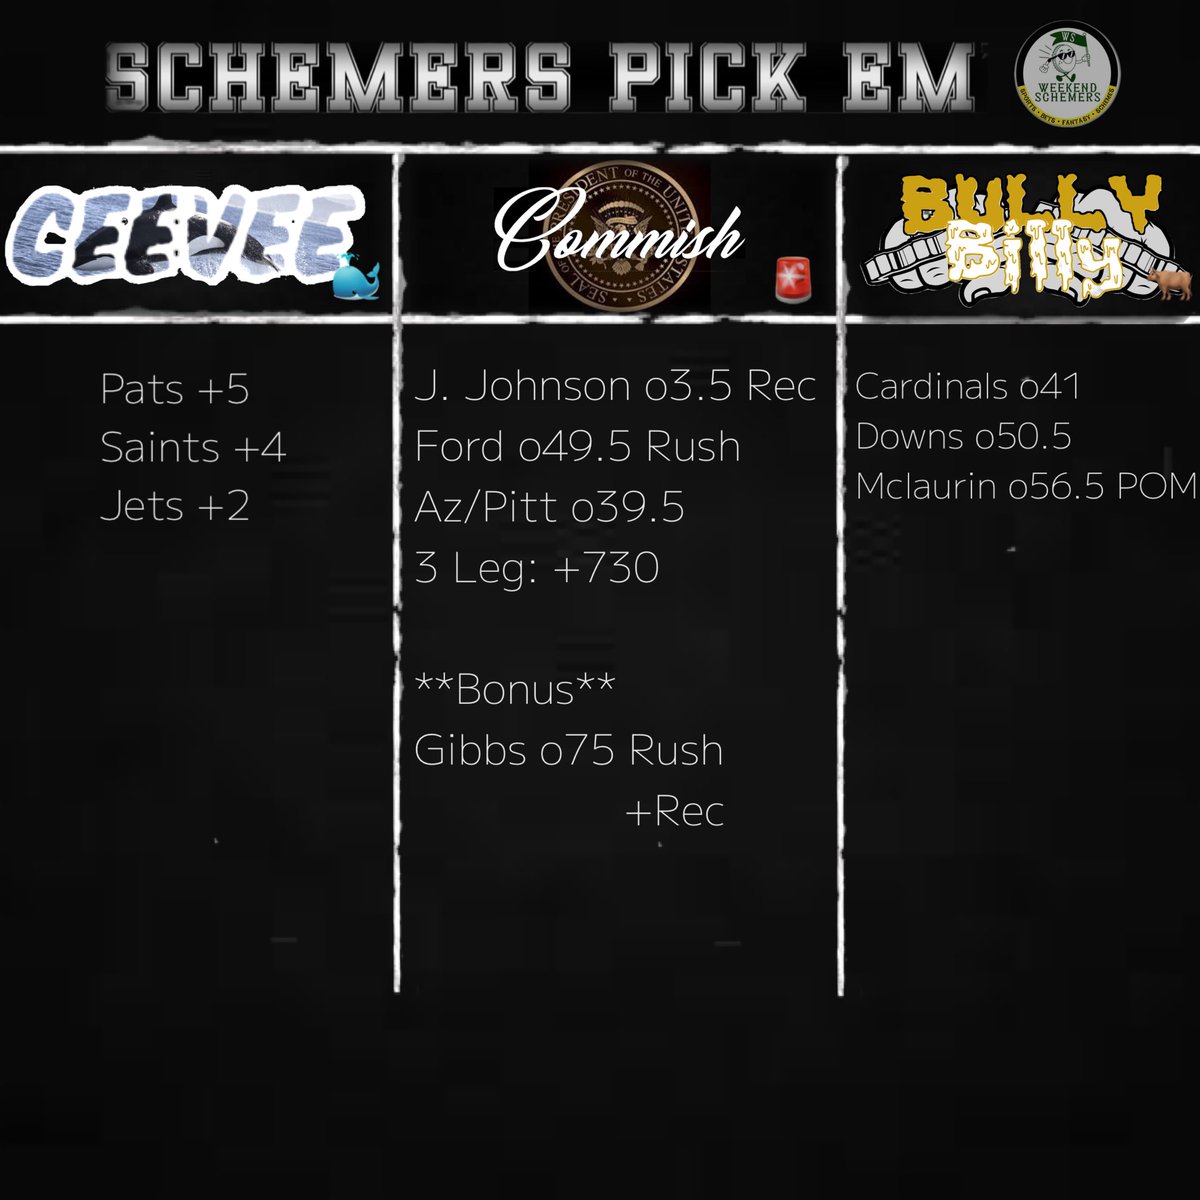 Schemers Sports and the Bookie Bustin’ Boys are 73% on NFL this season through 12.
Jump on the money train
#playofthemonth #NFL #Pickem #AVFC #EURO2024